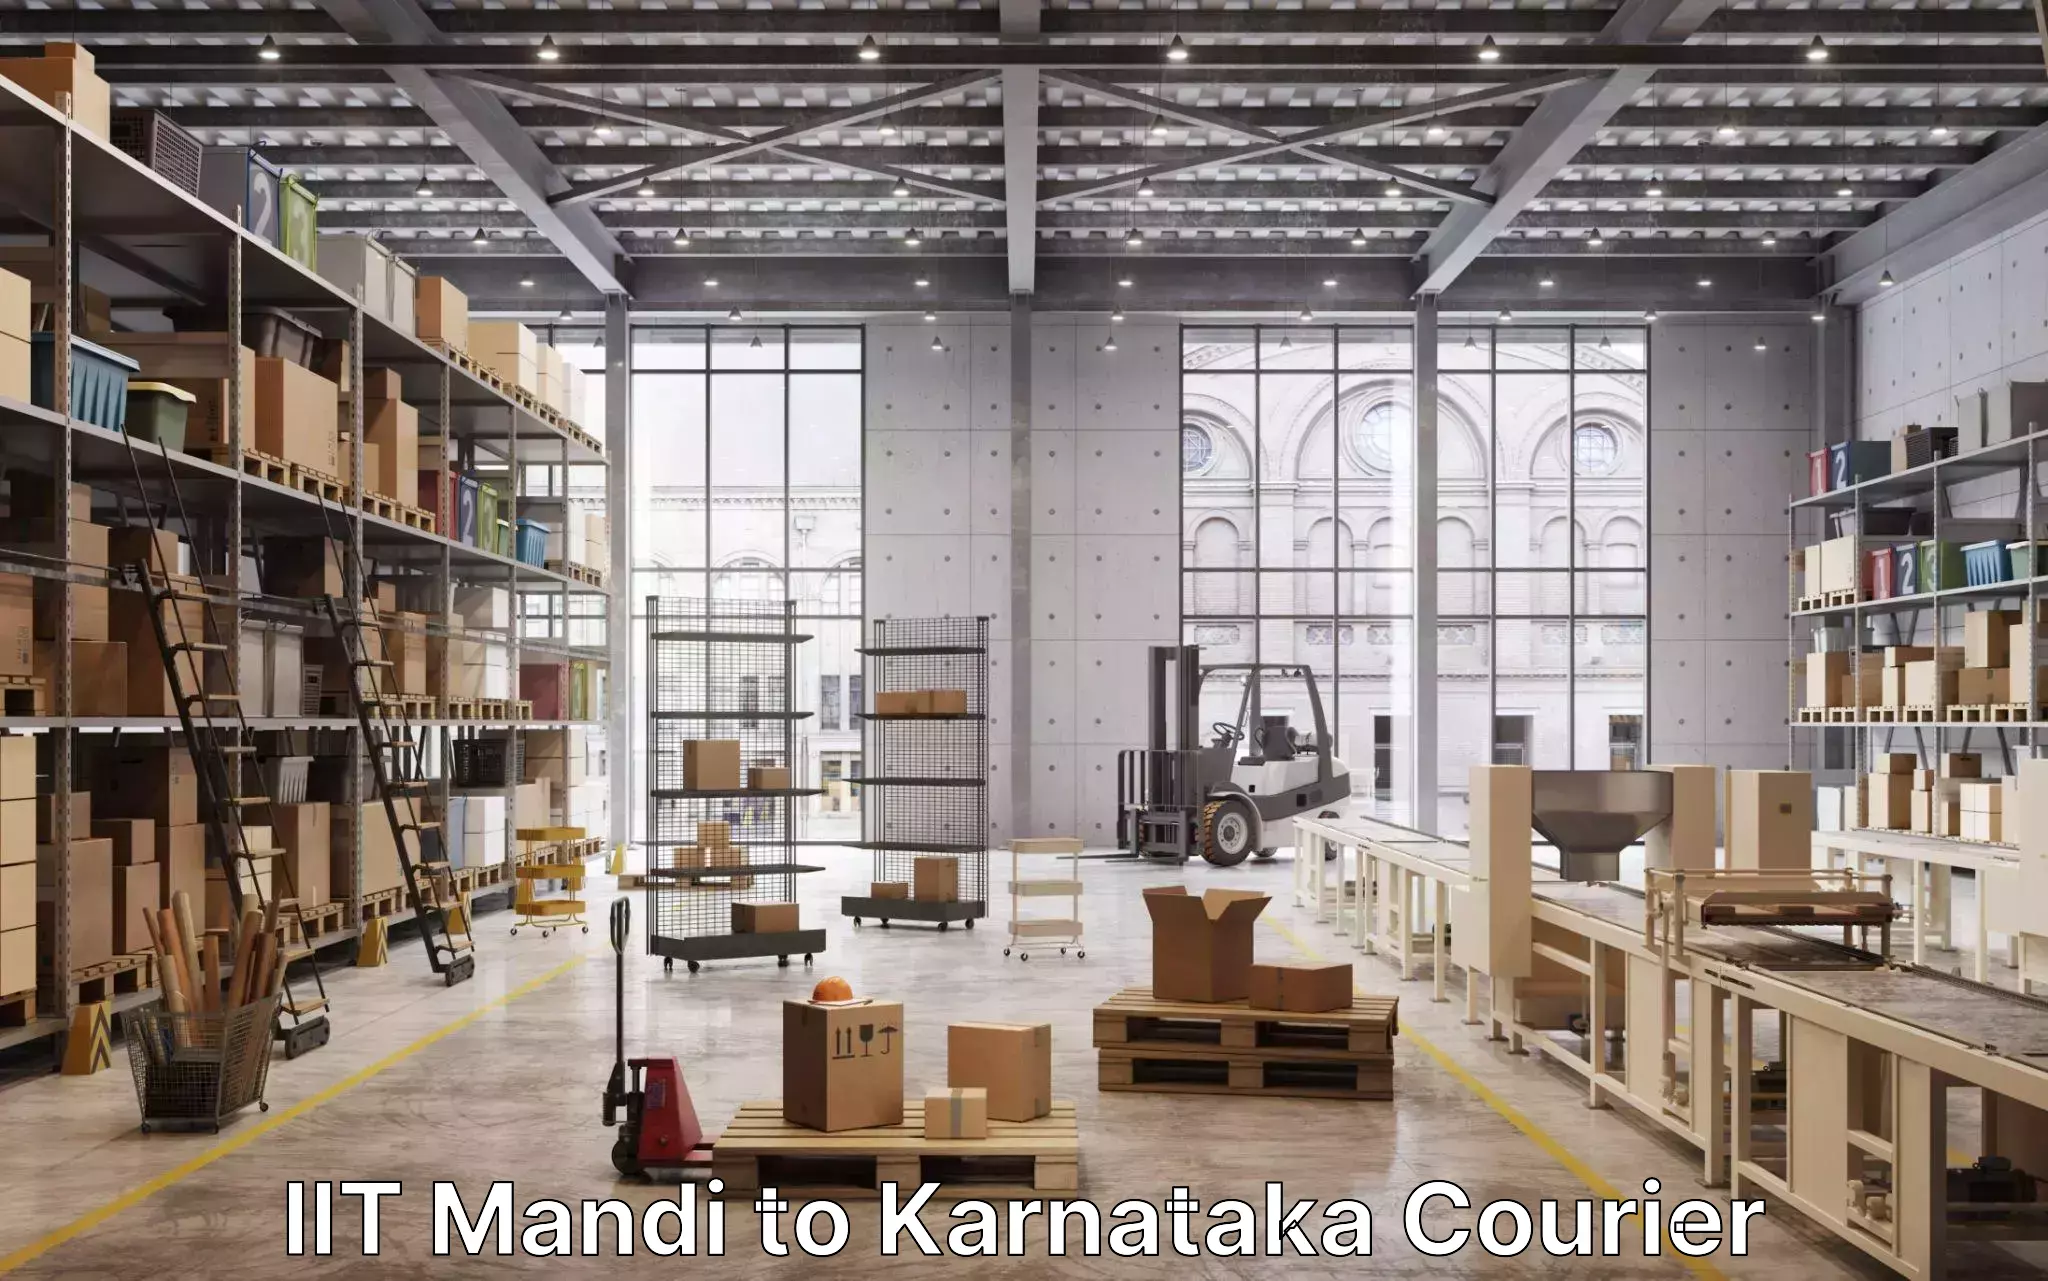 Moving and storage services IIT Mandi to IIT Dharwad